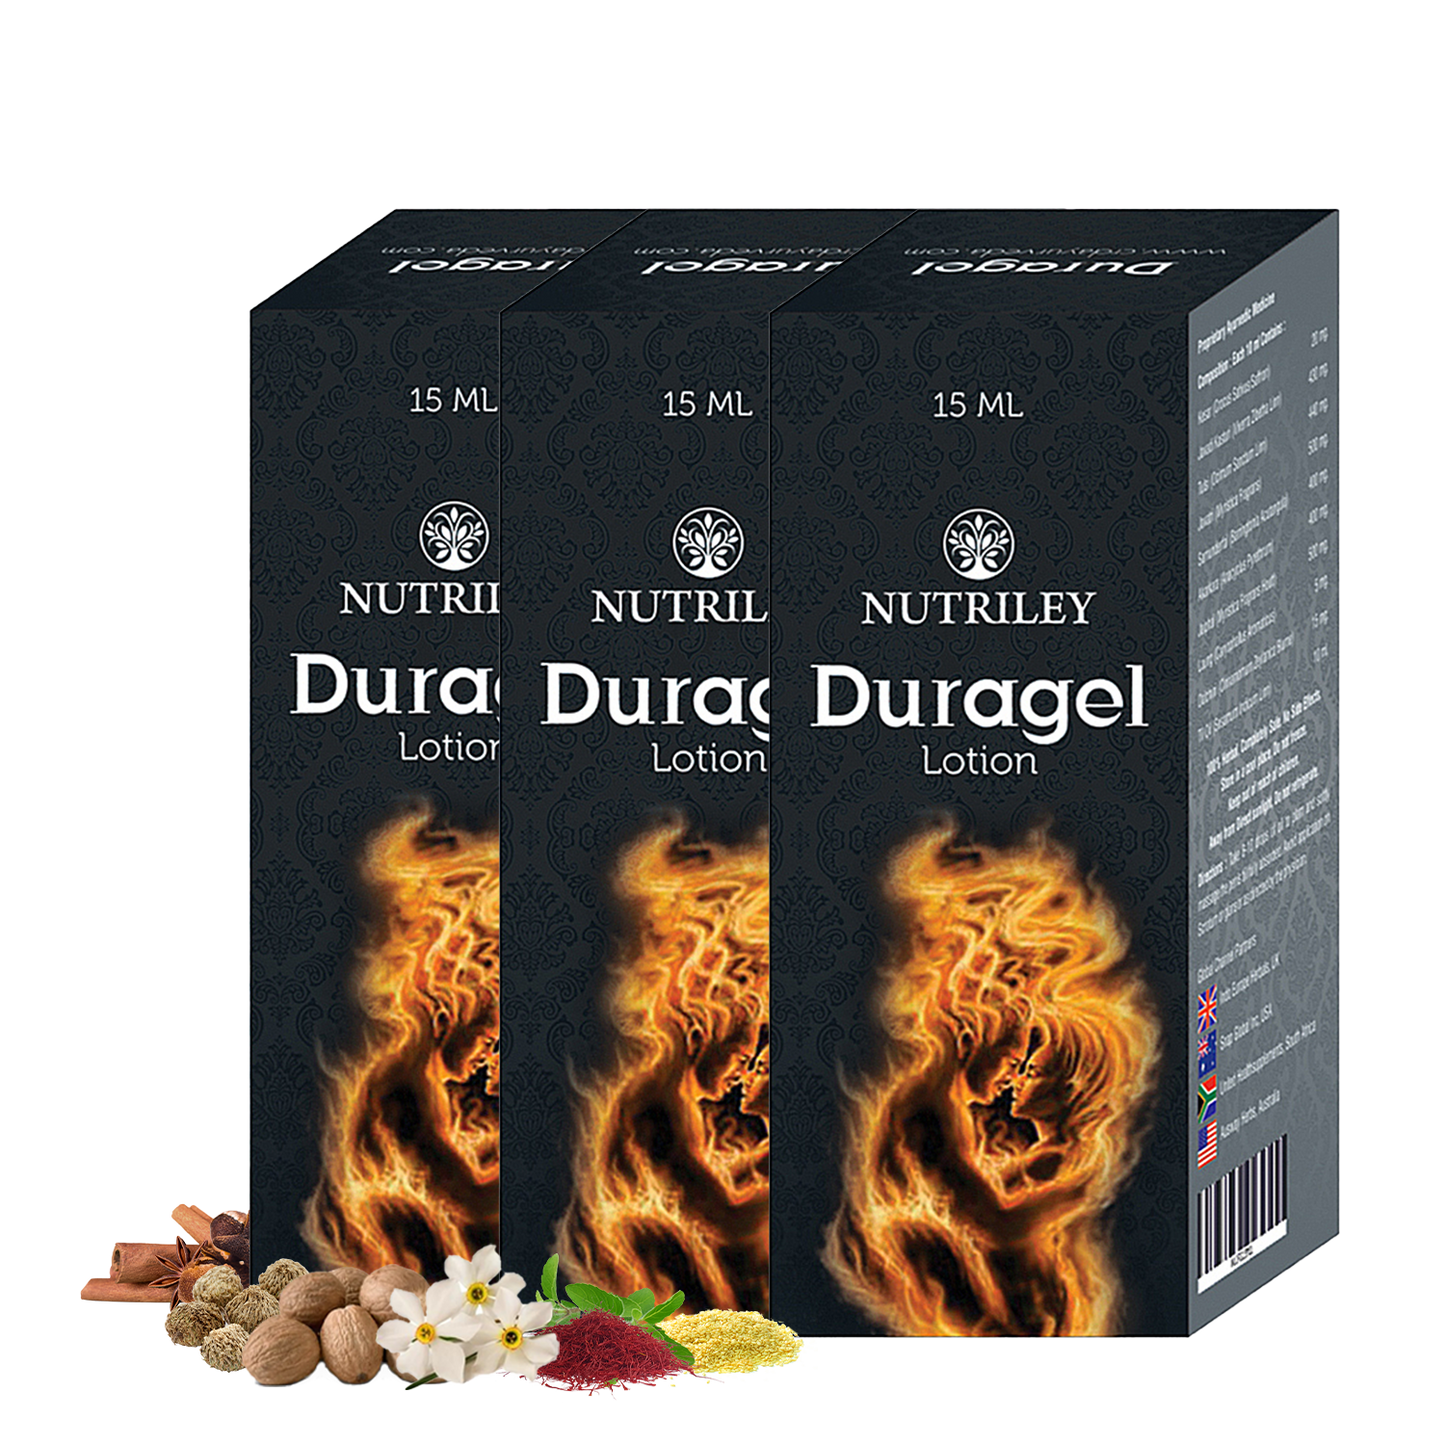 Nutriley Duragel - Sexual Wellness Lotion (15 ml) - Pack of 2